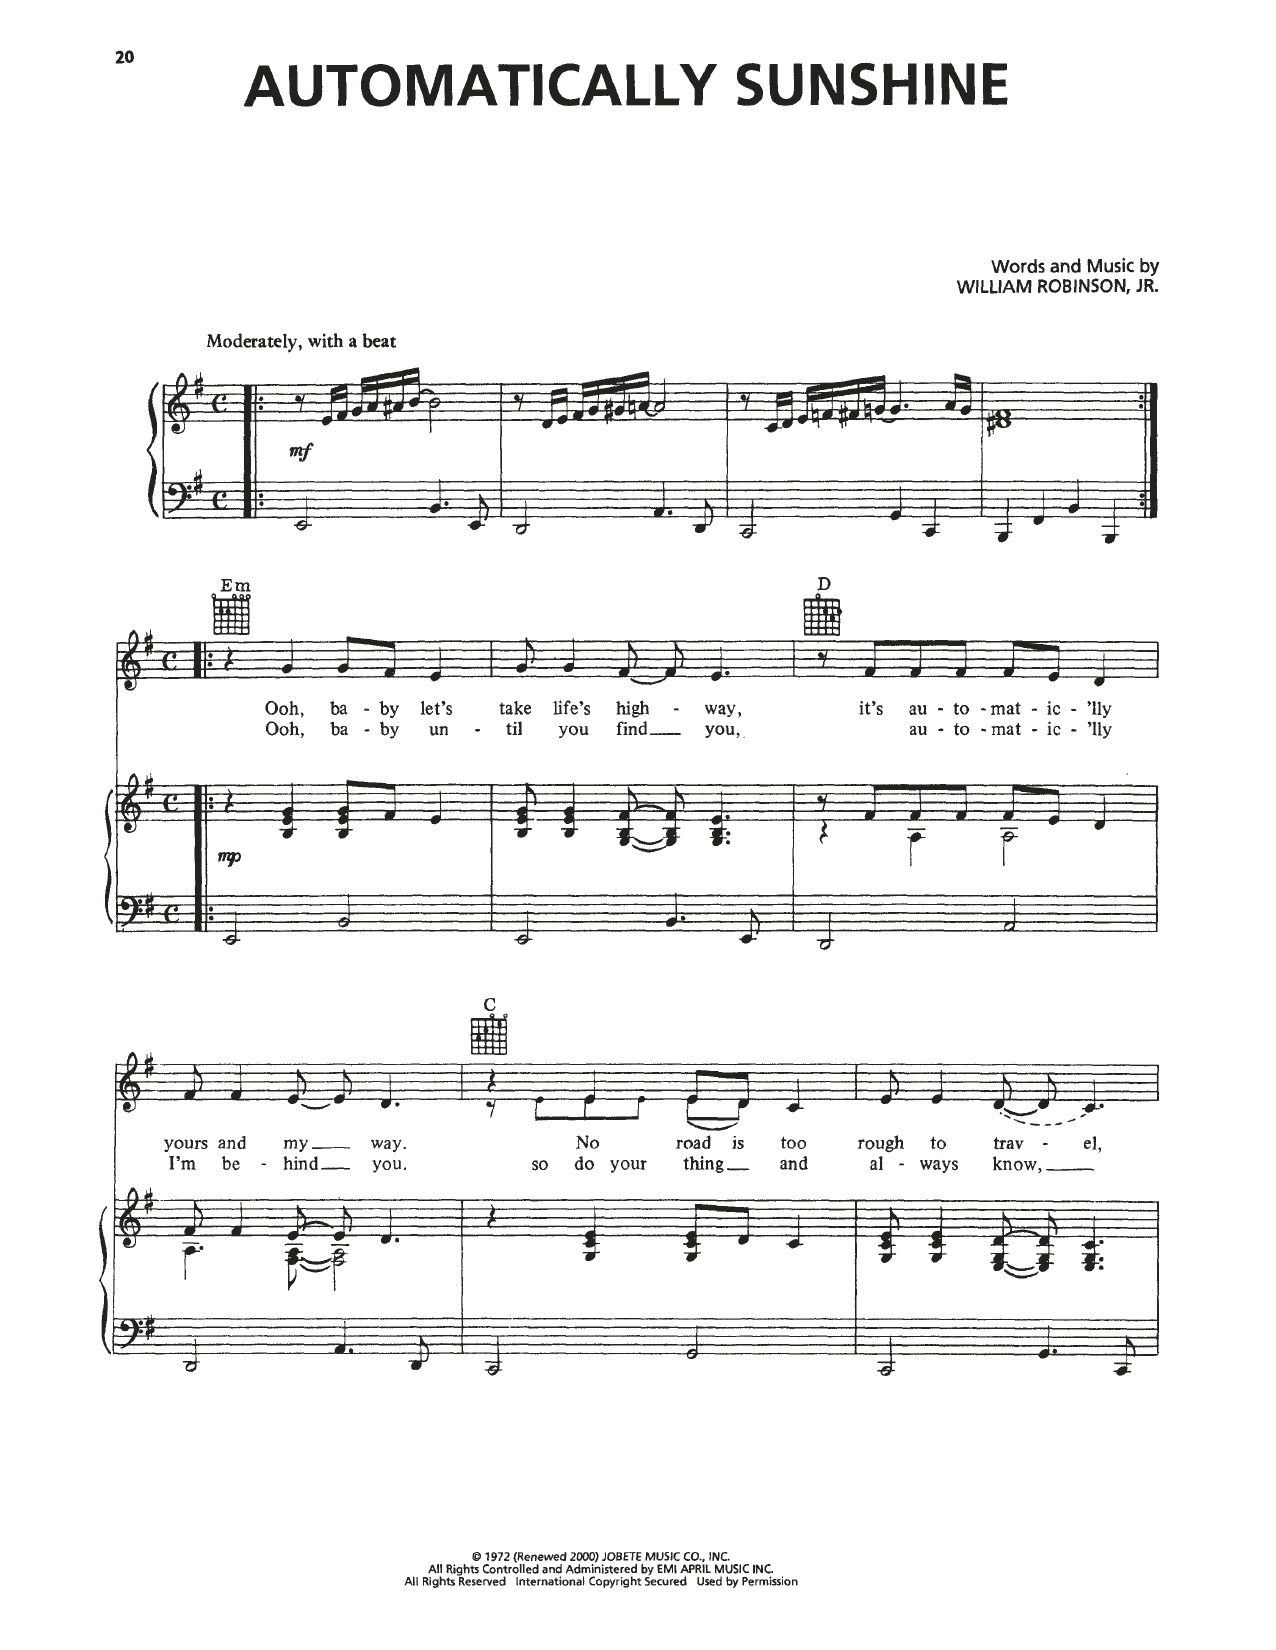 Download The Supremes Automatically Sunshine Sheet Music